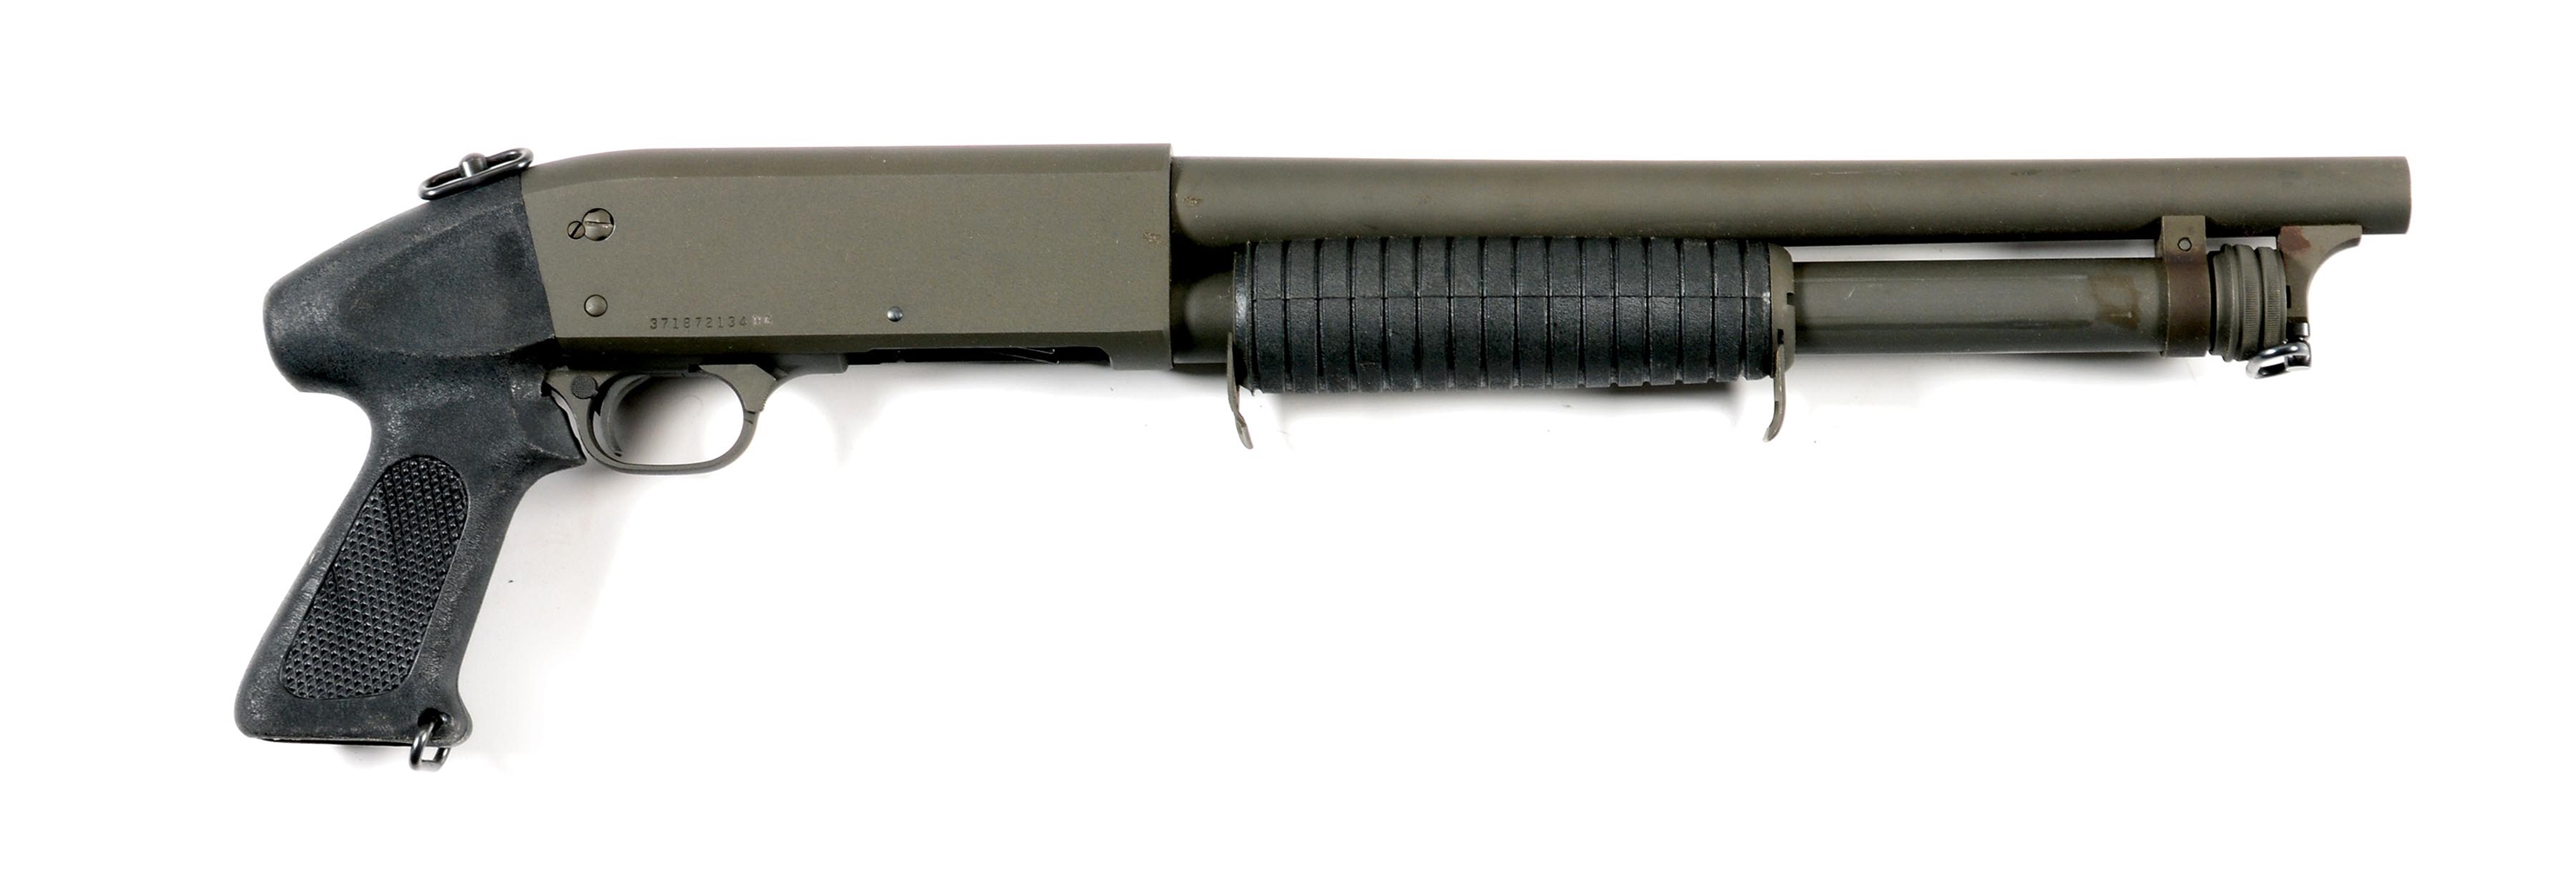 (N) ITHACA MODEL 37 FEATHERLIGHT STAKEOUT PUMP-ACTION 12 BORE SHOTGUN (ANY OTHER WEAPON).